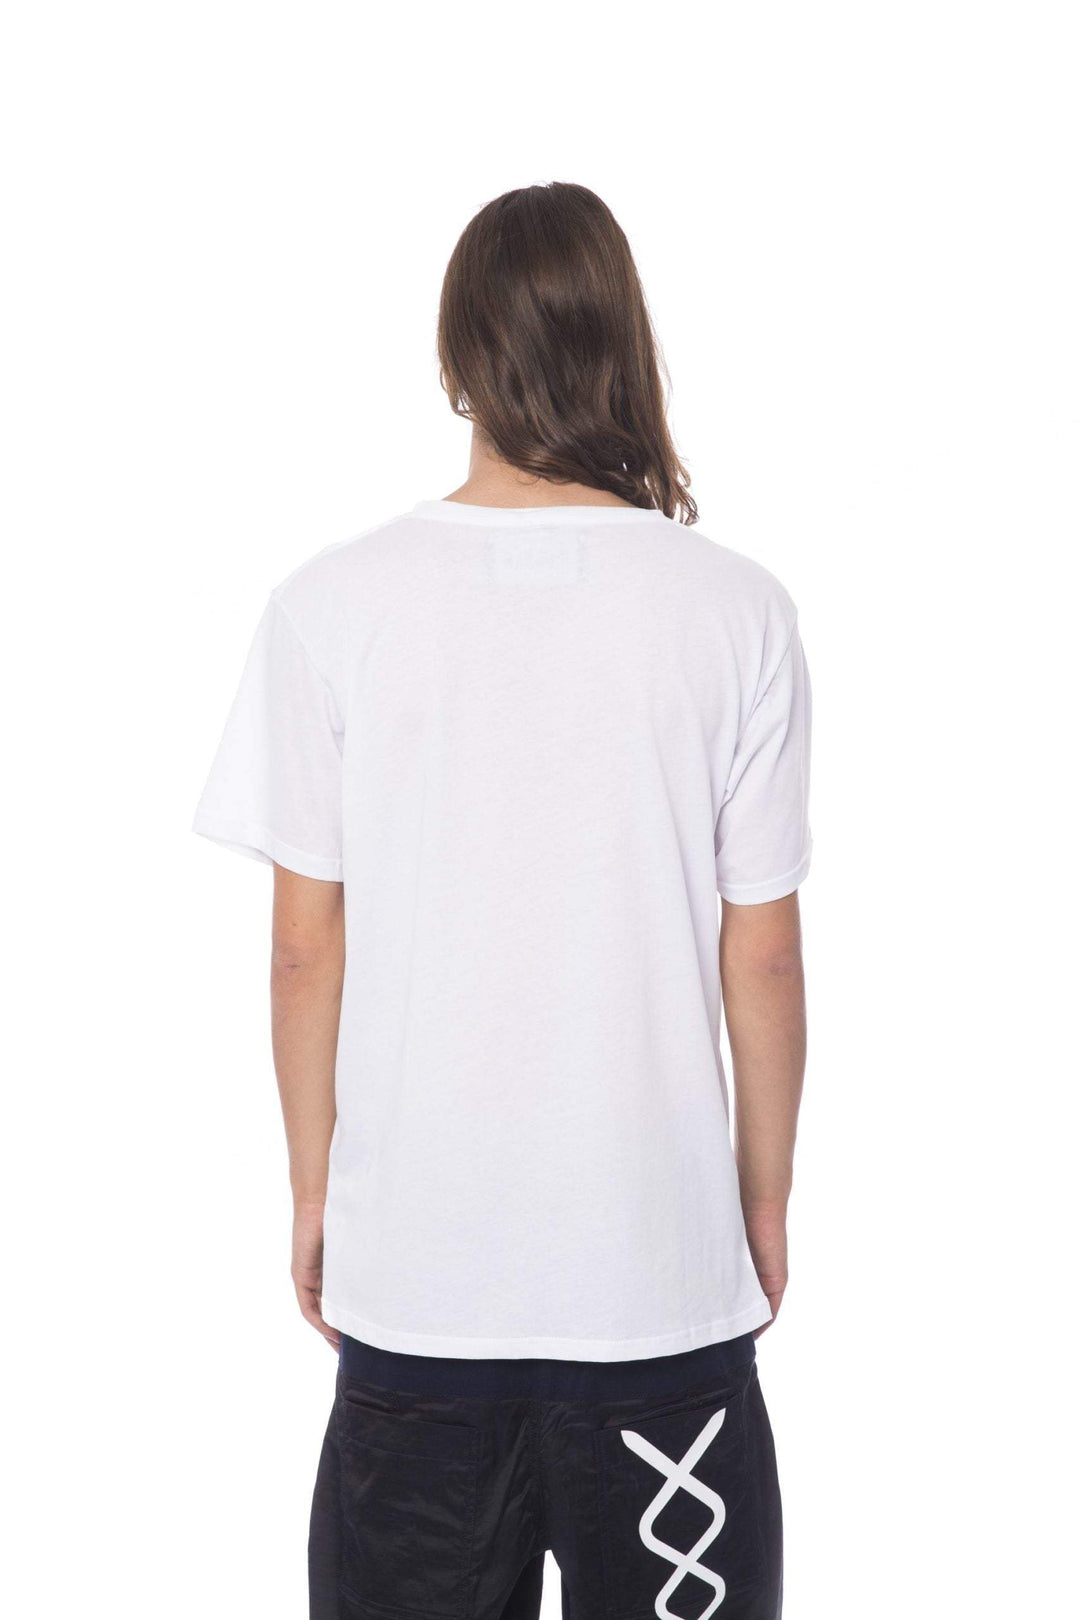 Nicolo Tonetto round neck printed T-shirt #men, feed-color-White, feed-gender-adult, feed-gender-male, L, M, Nicolo Tonetto, S, T-shirts - Men - Clothing, White at SEYMAYKA